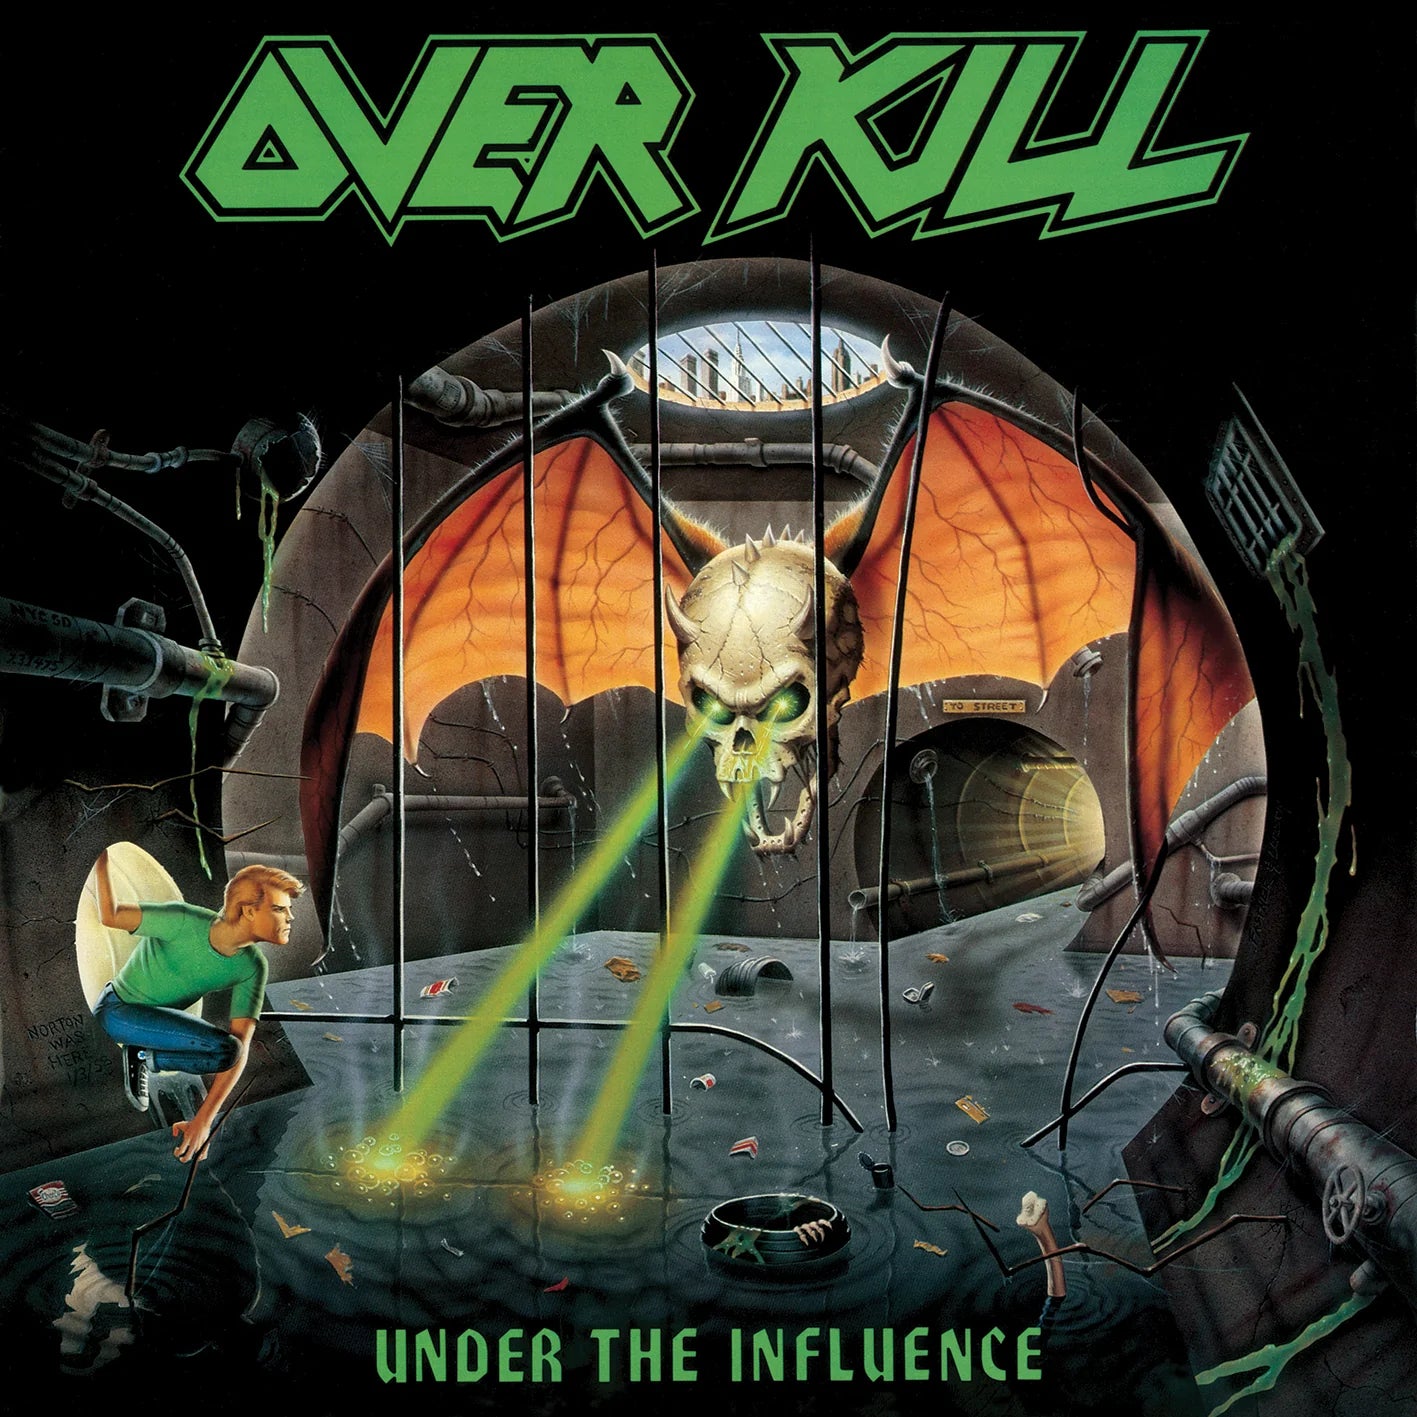 OVERKILL - Under The Influence LP (YELLOW)